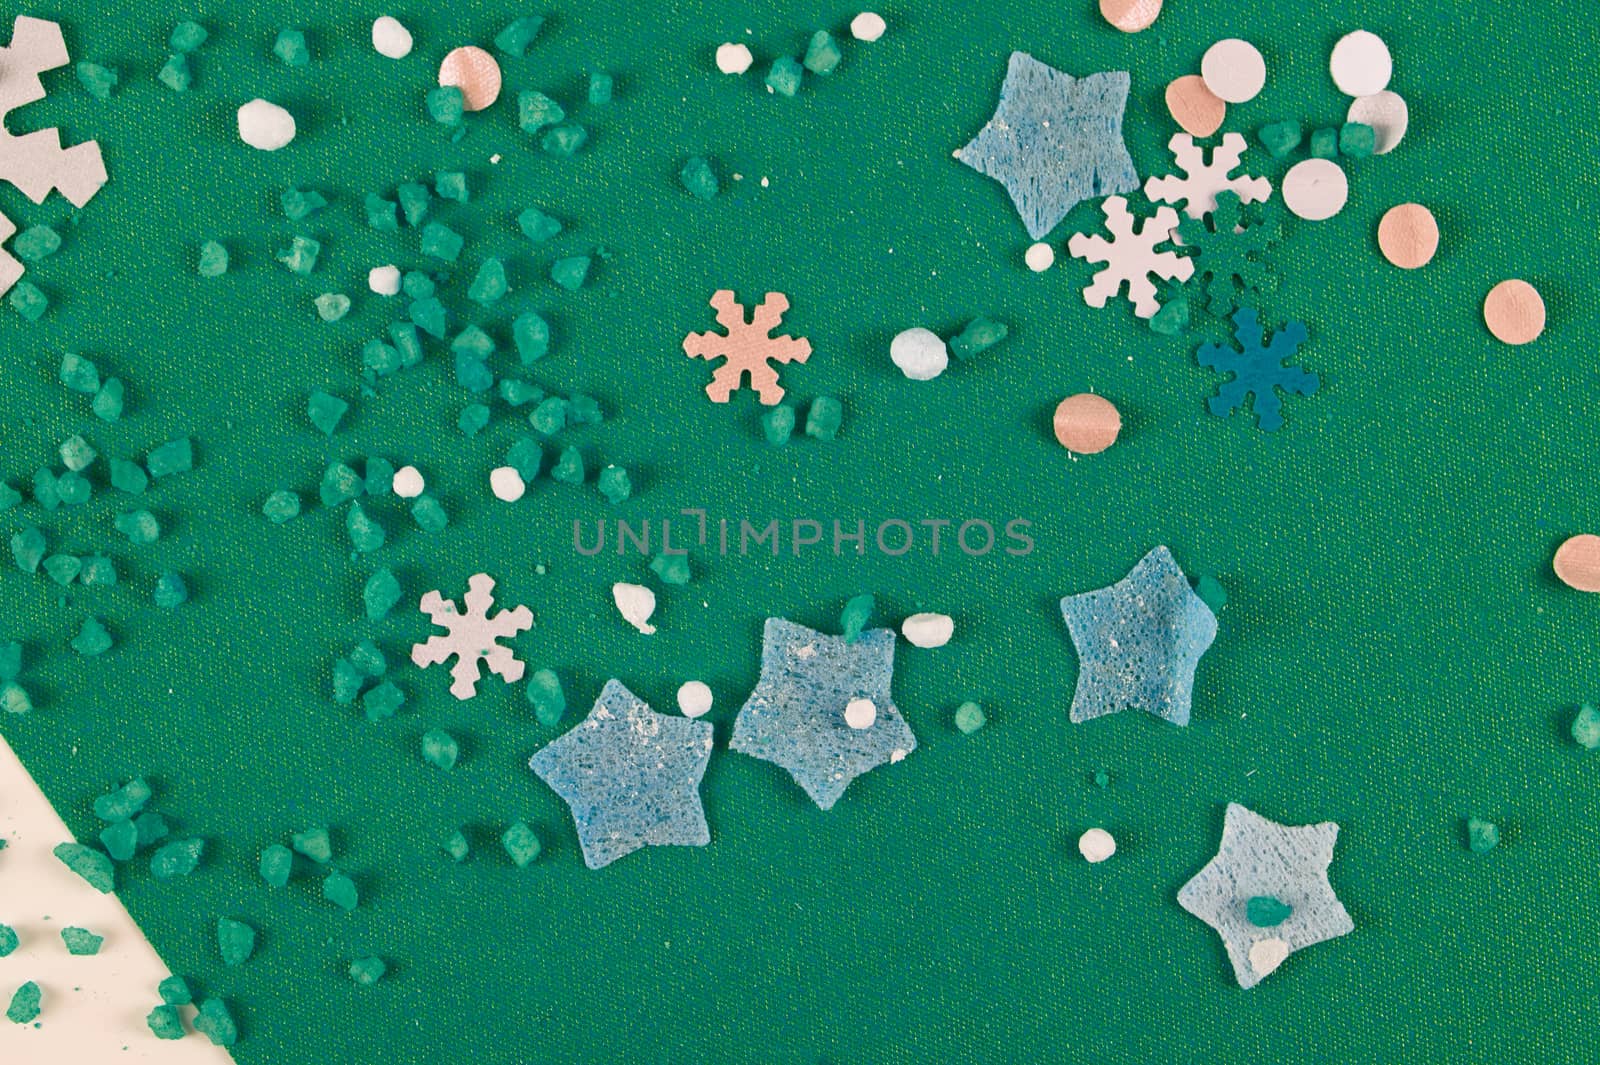 Christmas color background with snowflakes